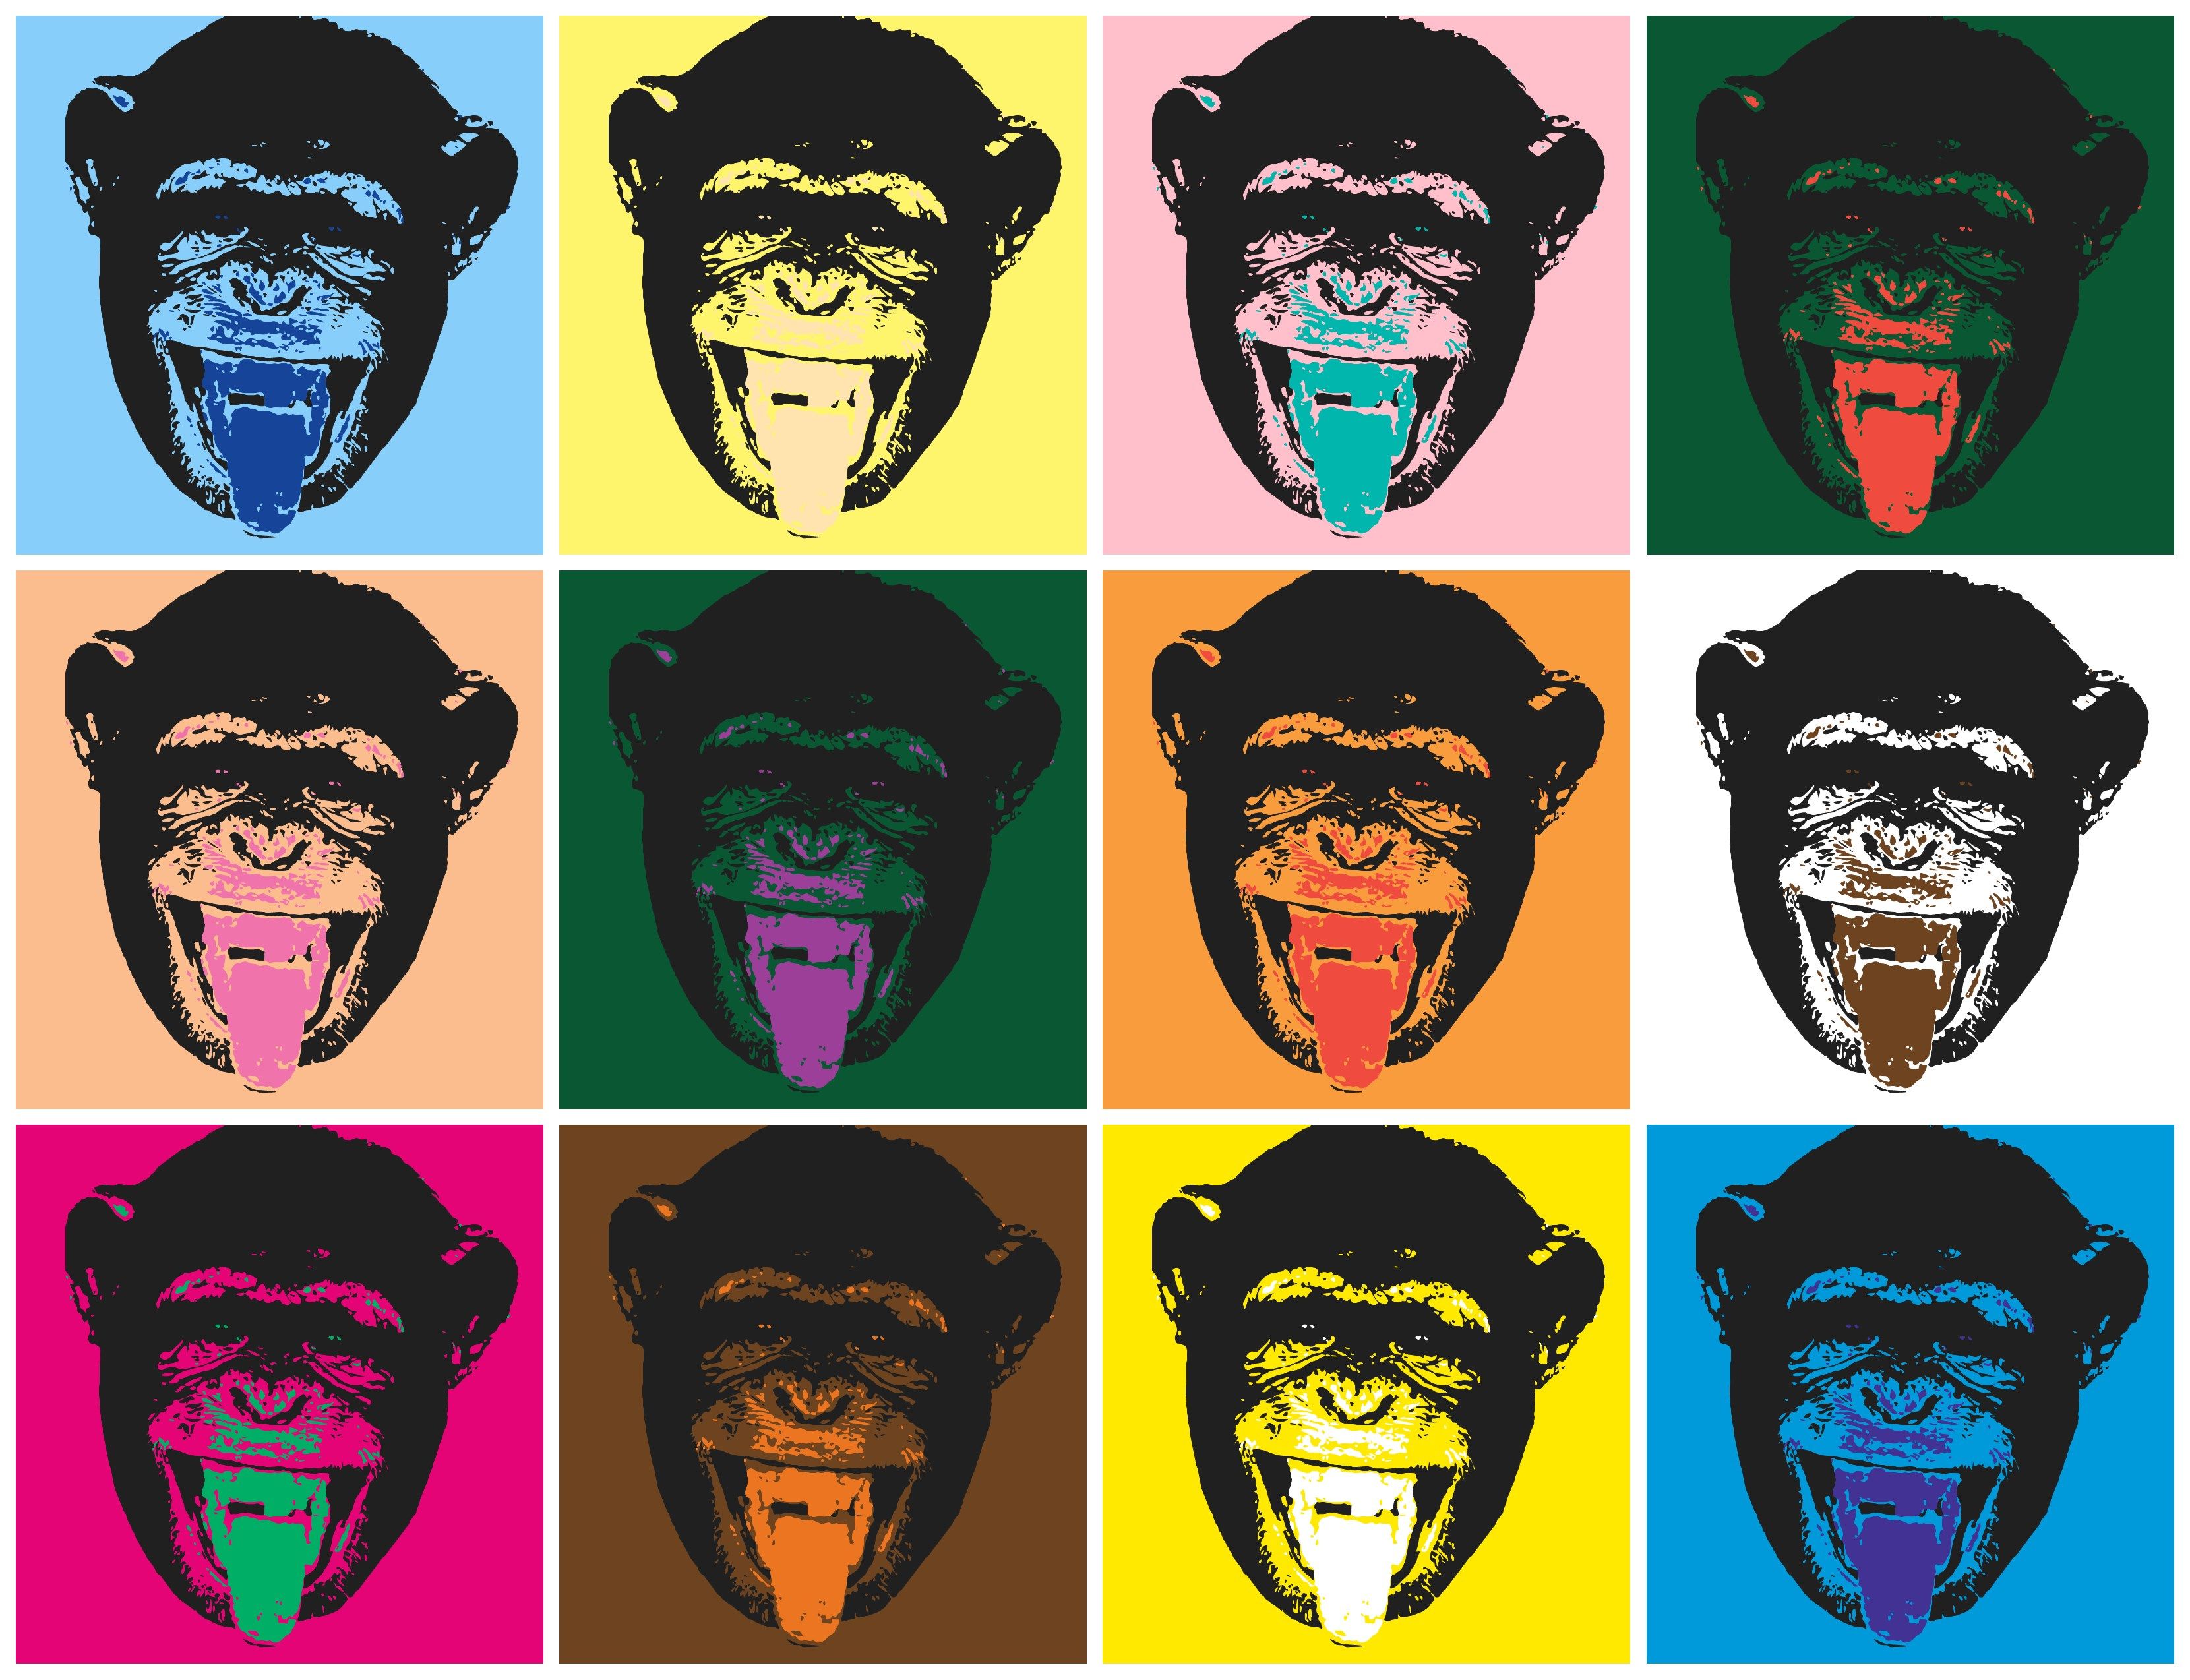 The Vector Pop Art effect allows you to create a vector-based Pop Art image.